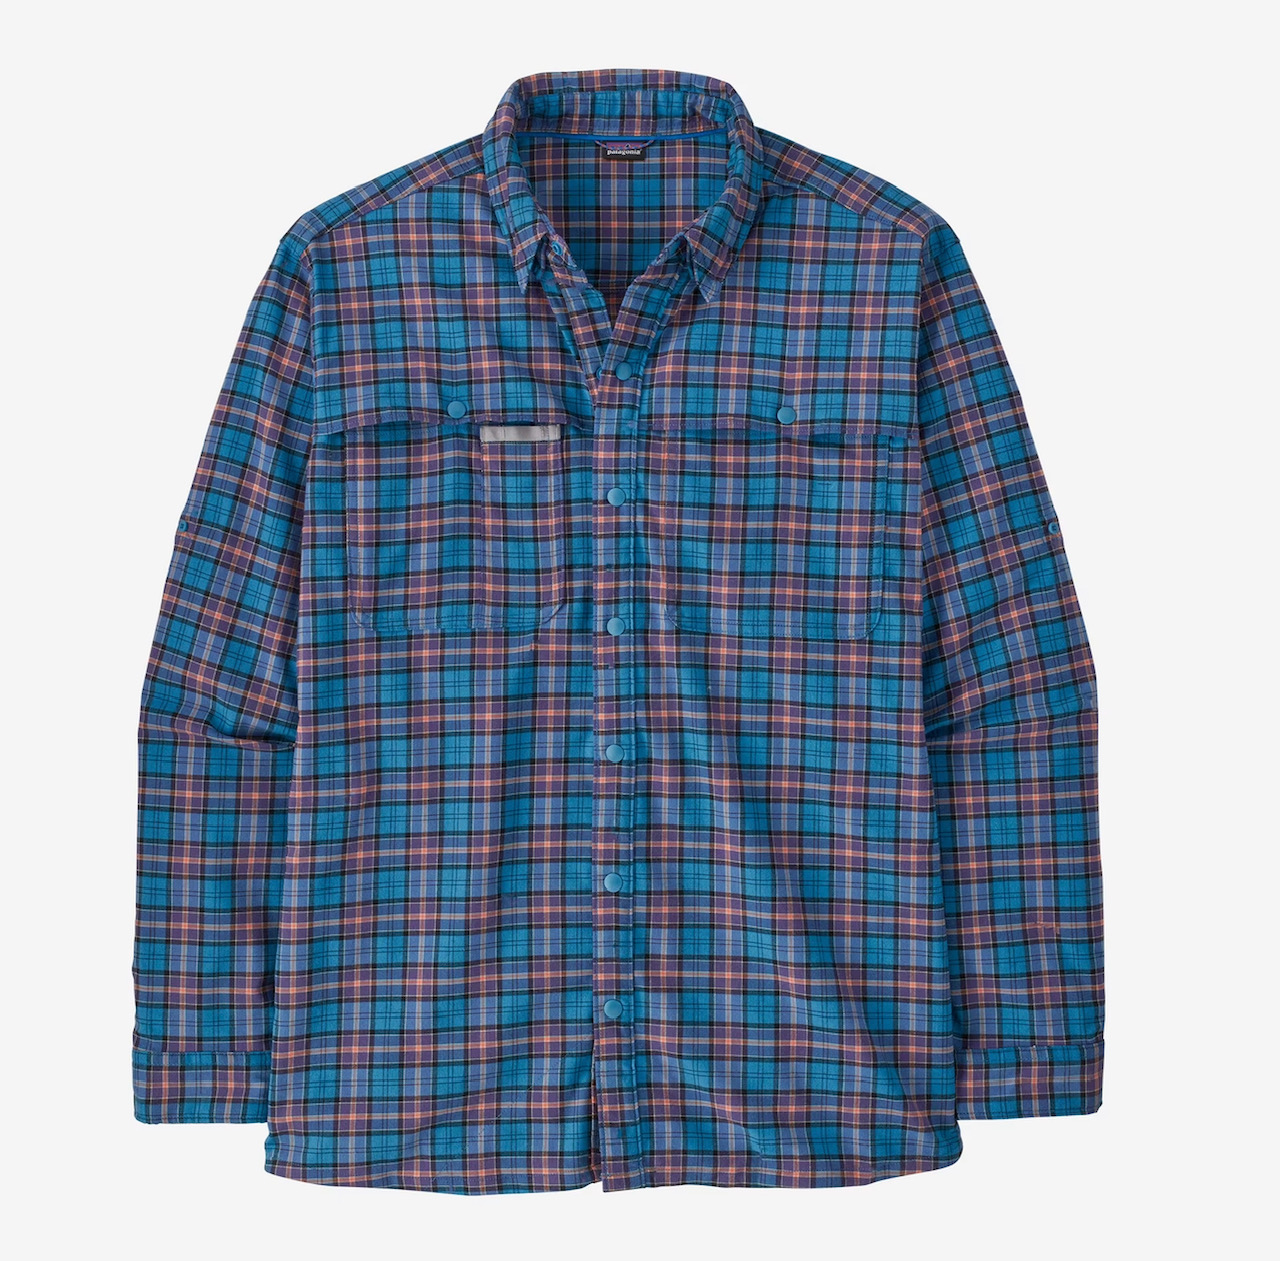 Patagonia M's Early Rise Stretch Shirt - On the Fly: Anacapa Blue - XXL